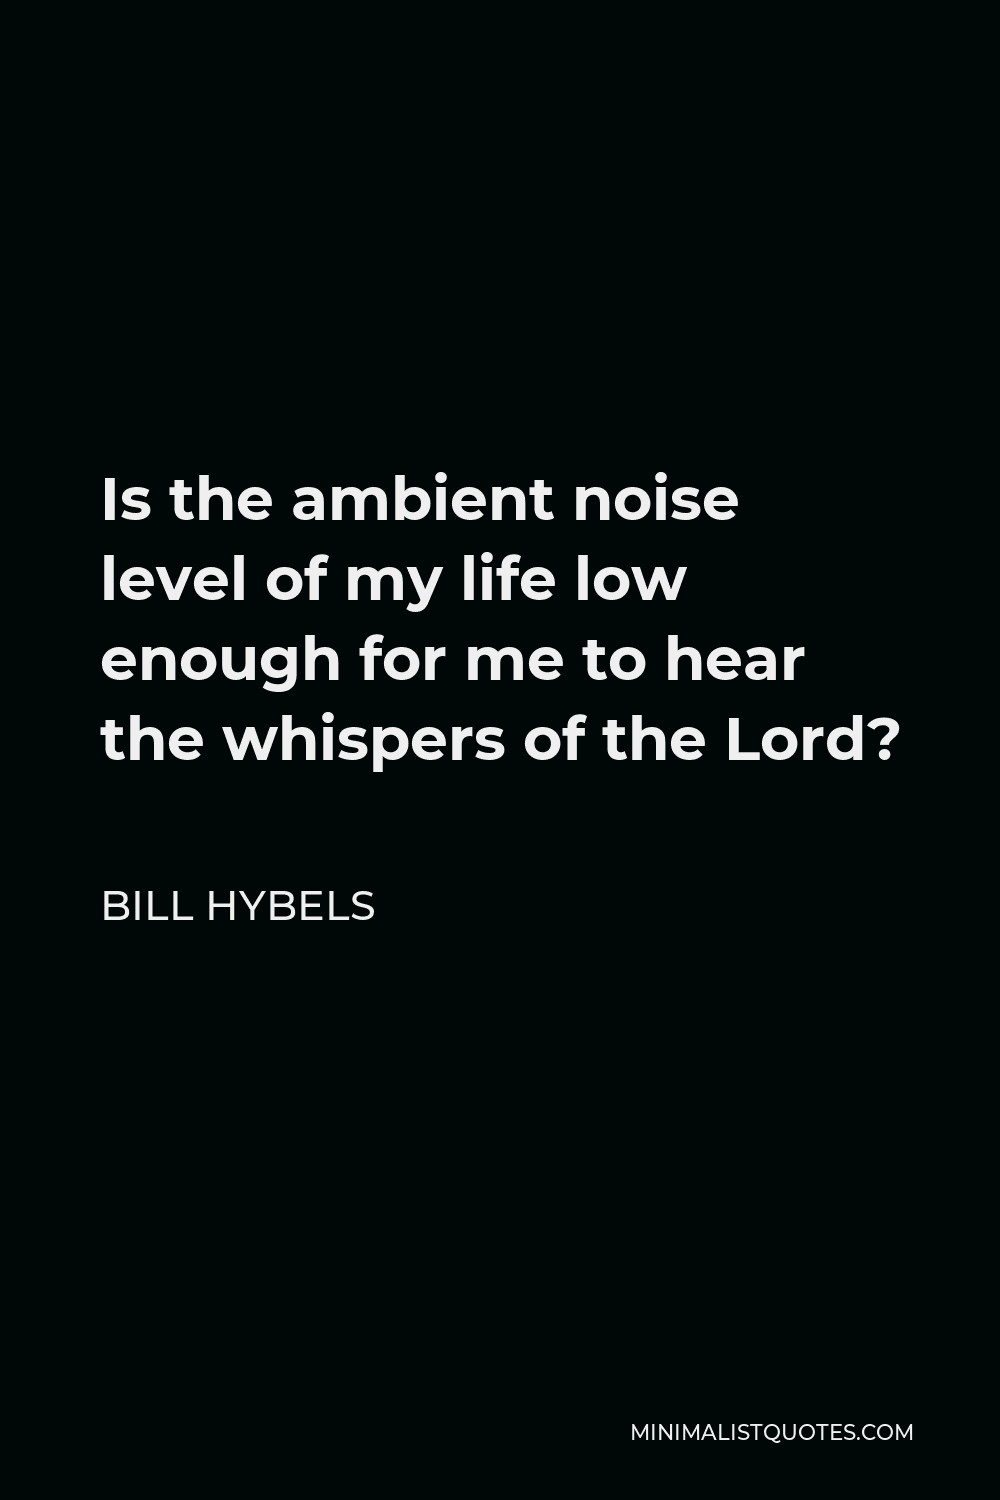 Bill Hybels Quote - Is the ambient noise level of my life low enough for me to hear the whispers of the Lord?